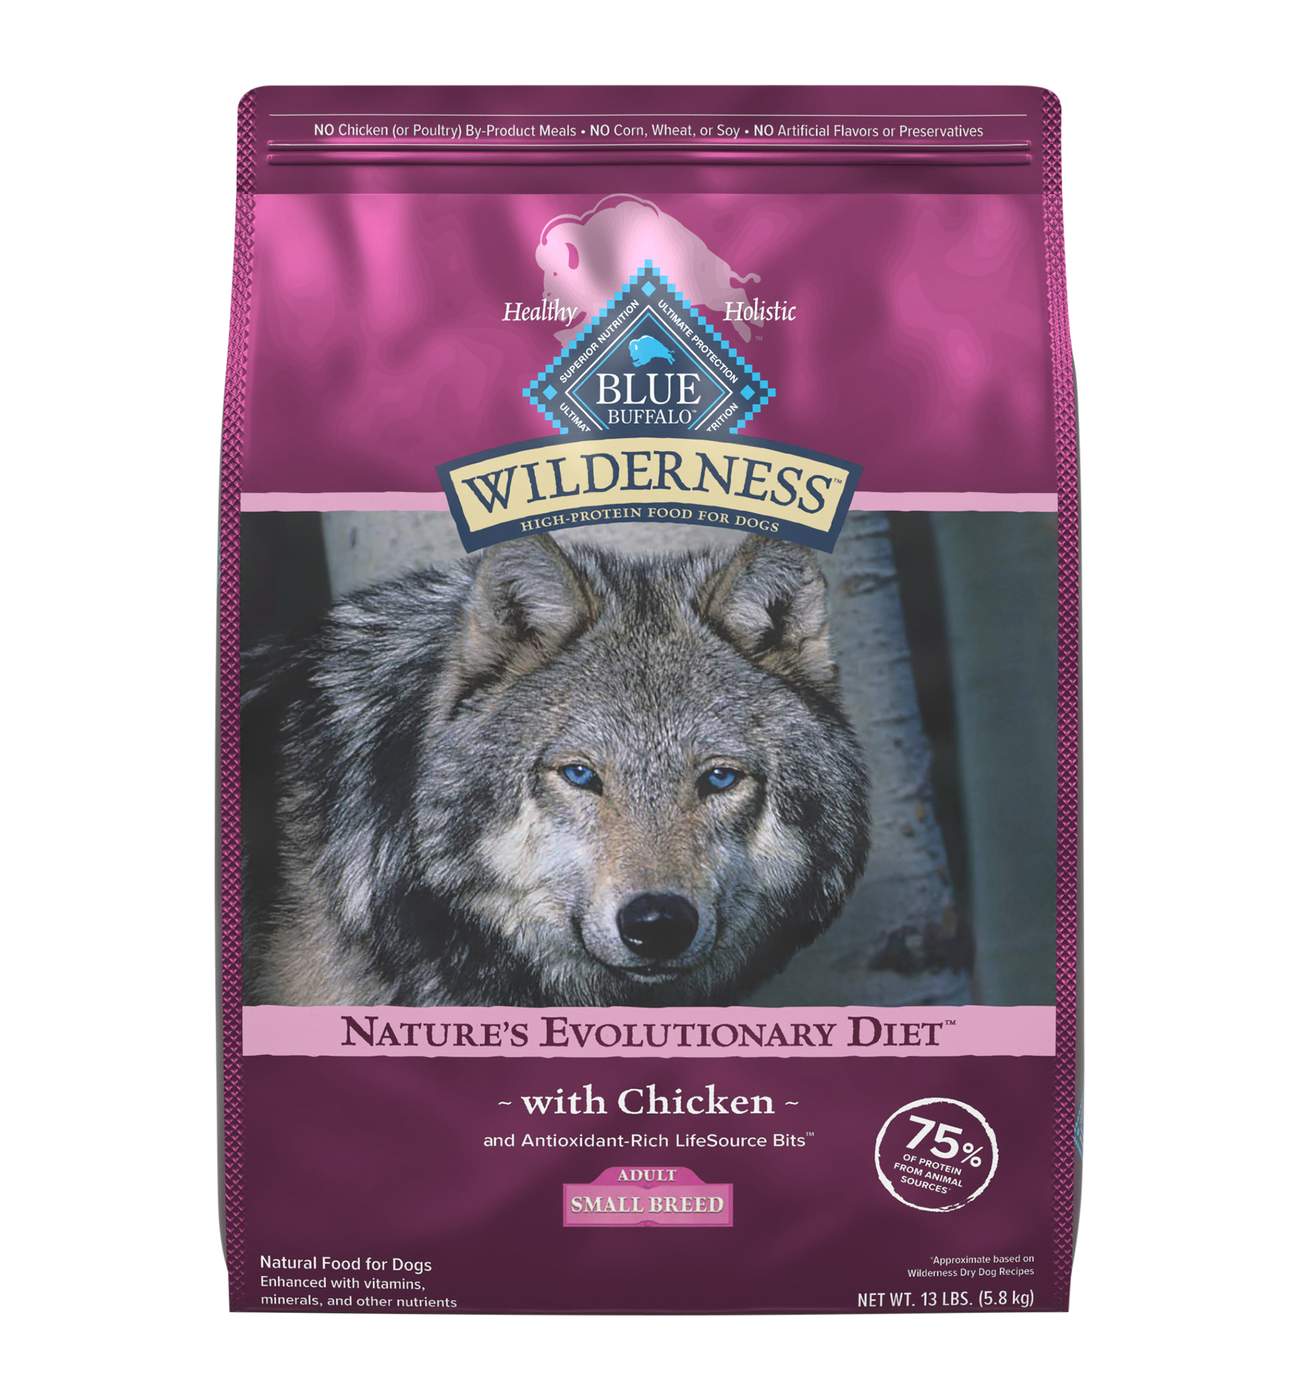 Blue Buffalo Wilderness Small Breed Chicken & LifeSource Bits Dry Dog Food; image 1 of 2